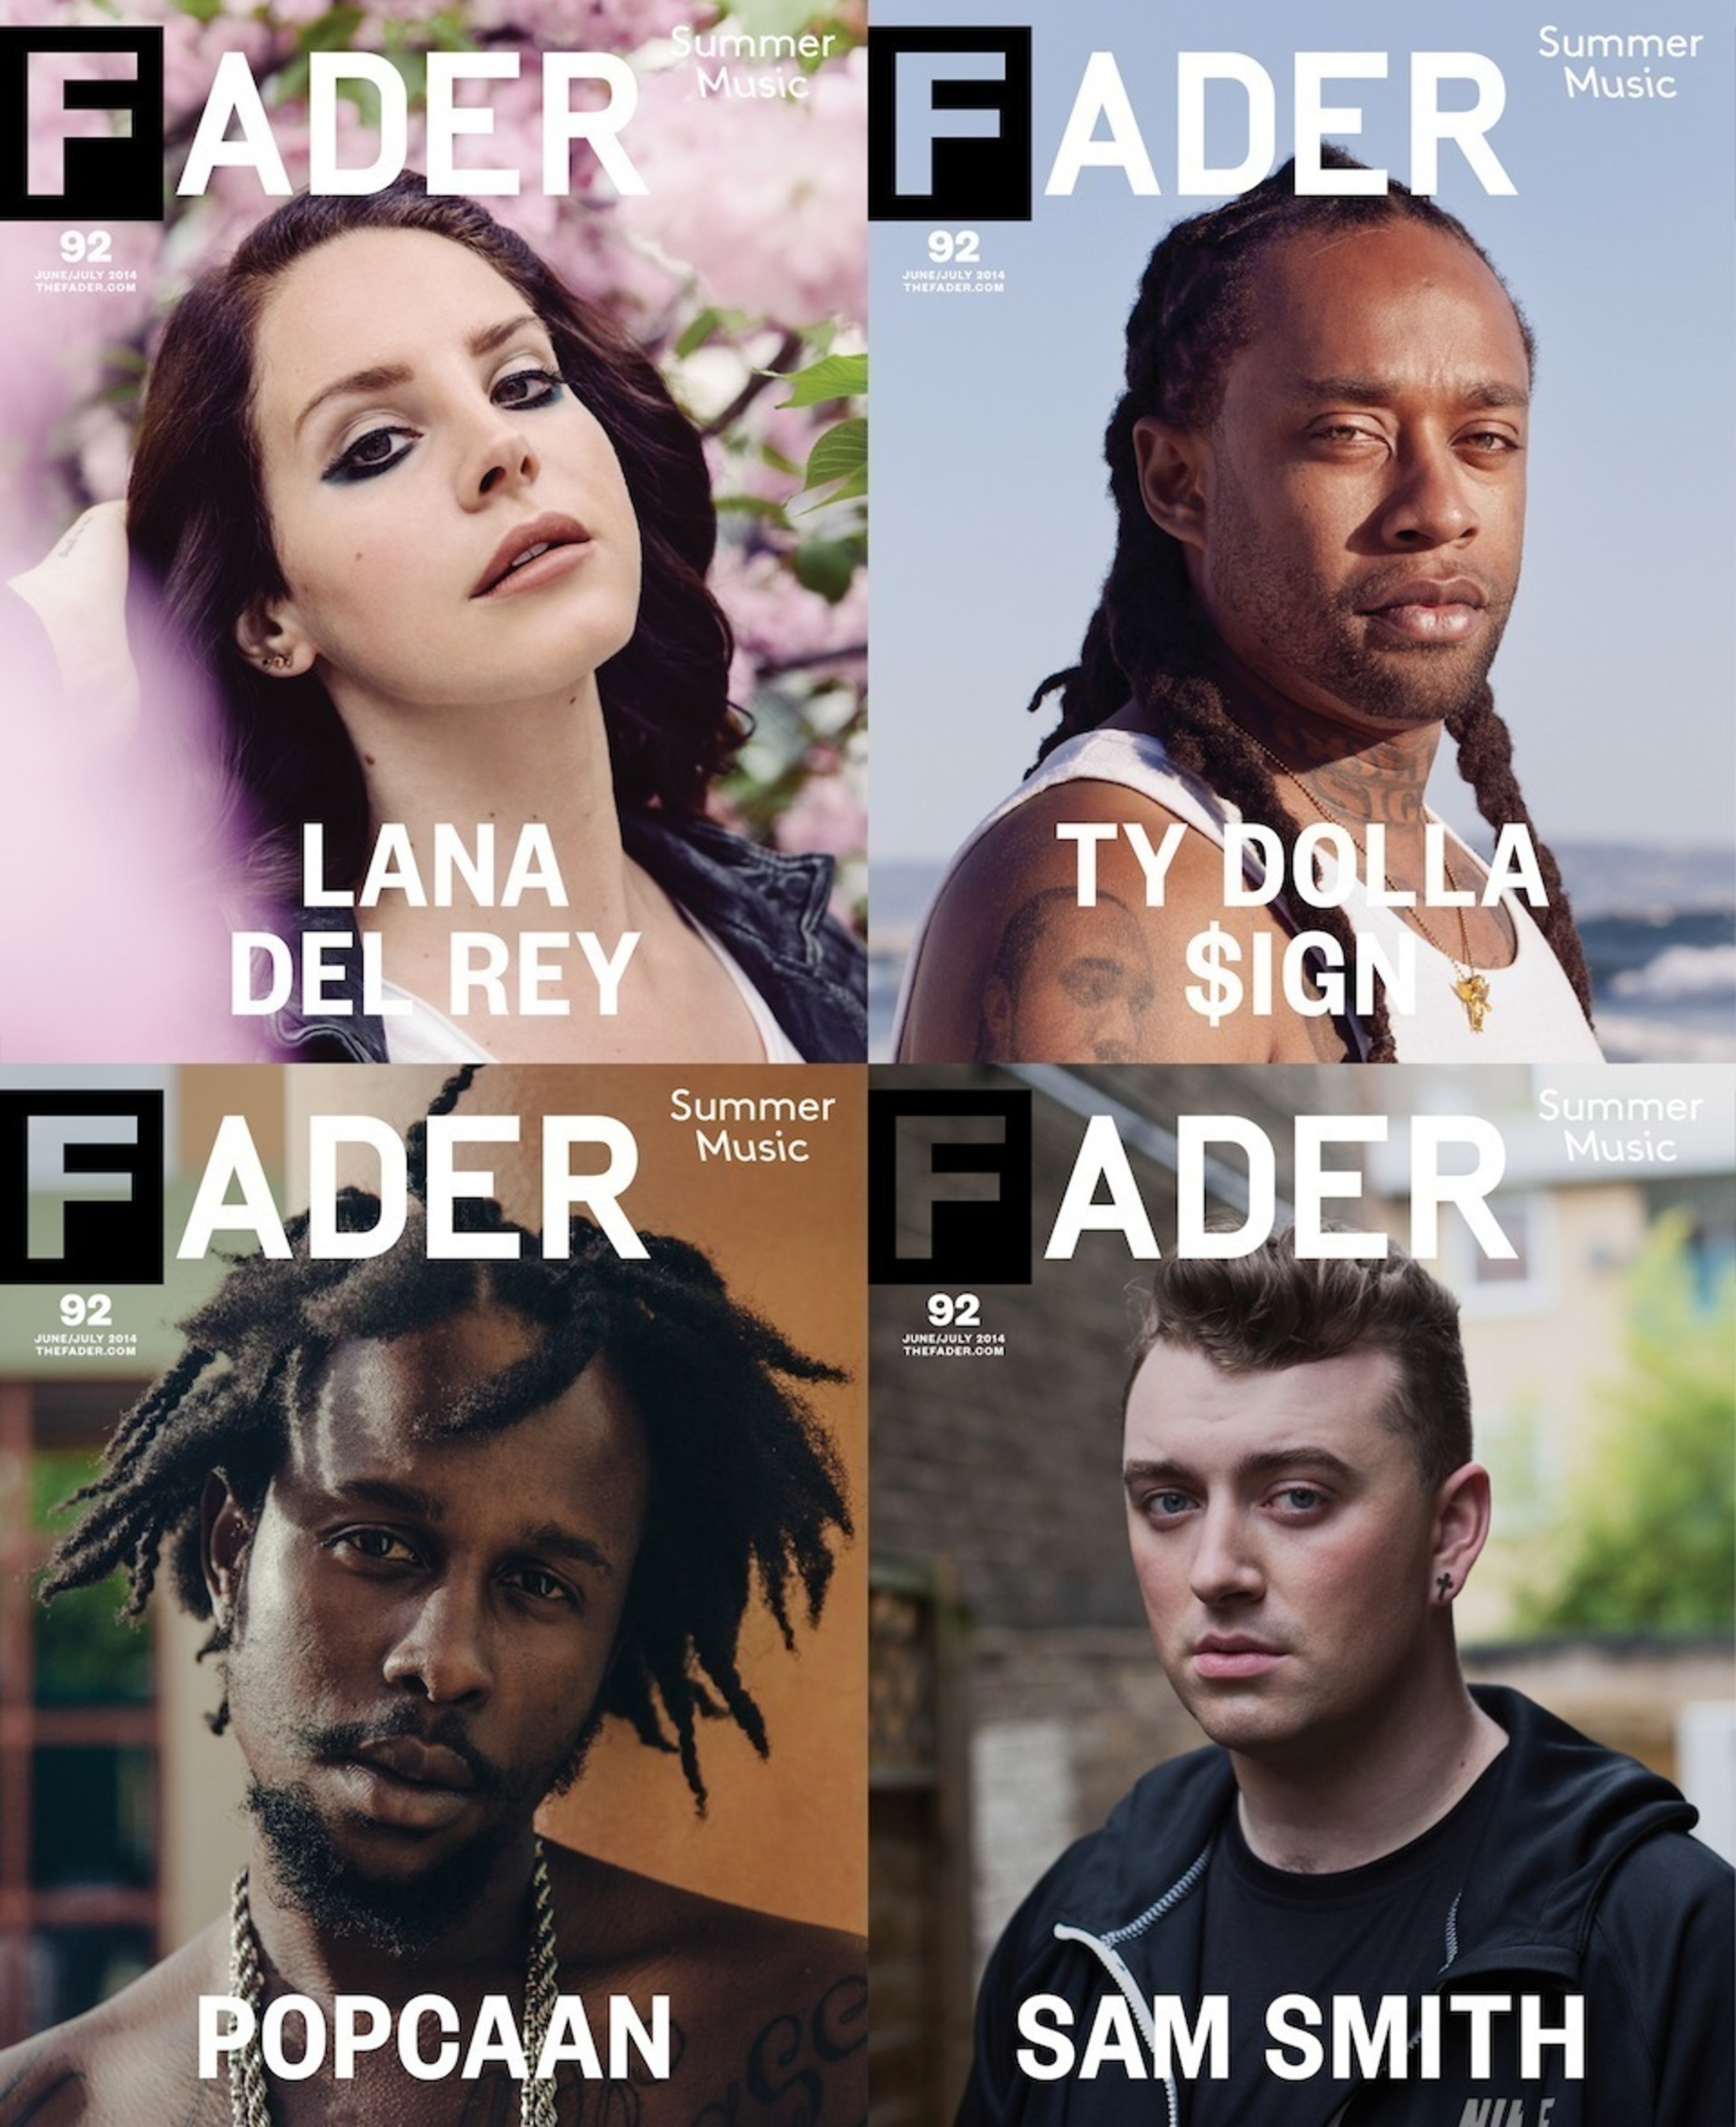 The FADER Releases Four-Cover Summer Music Issue Featuring Exclusive Interviews With Lana Del Rey, Sam Smith, And More (PRNewsFoto/The FADER)